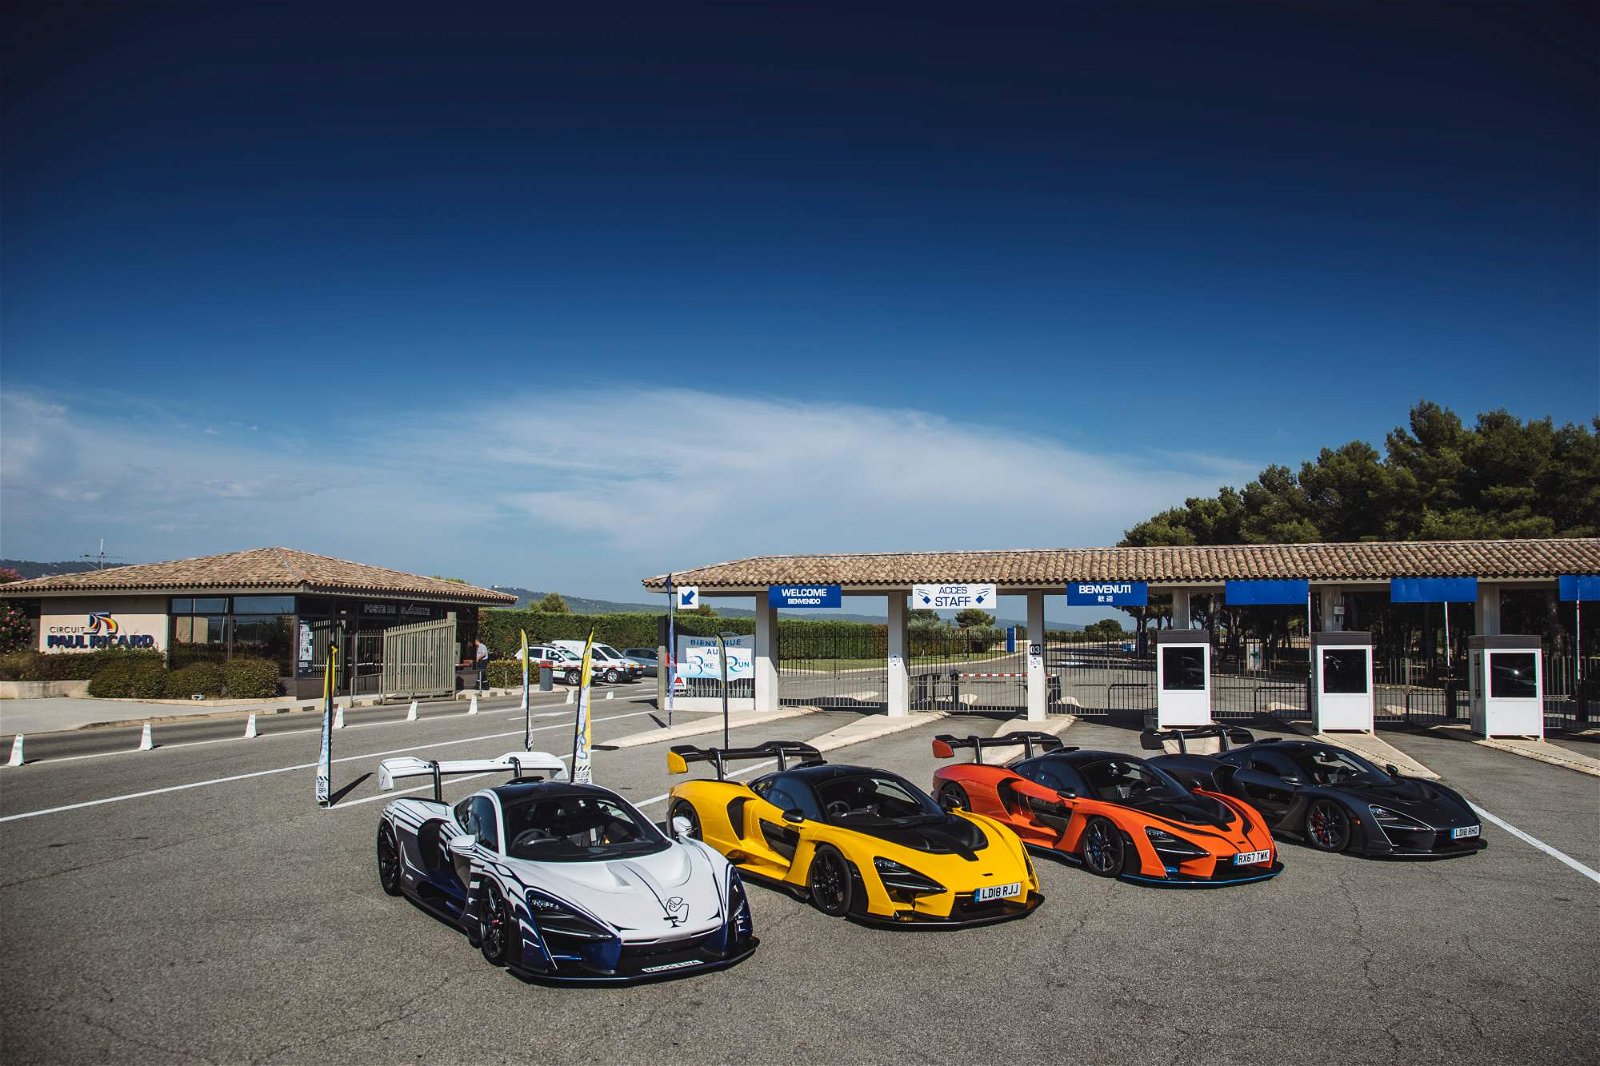 McLaren-Senna-chassis-001-on-maiden-road-trip-to-Paul-Ricard-circuit-10